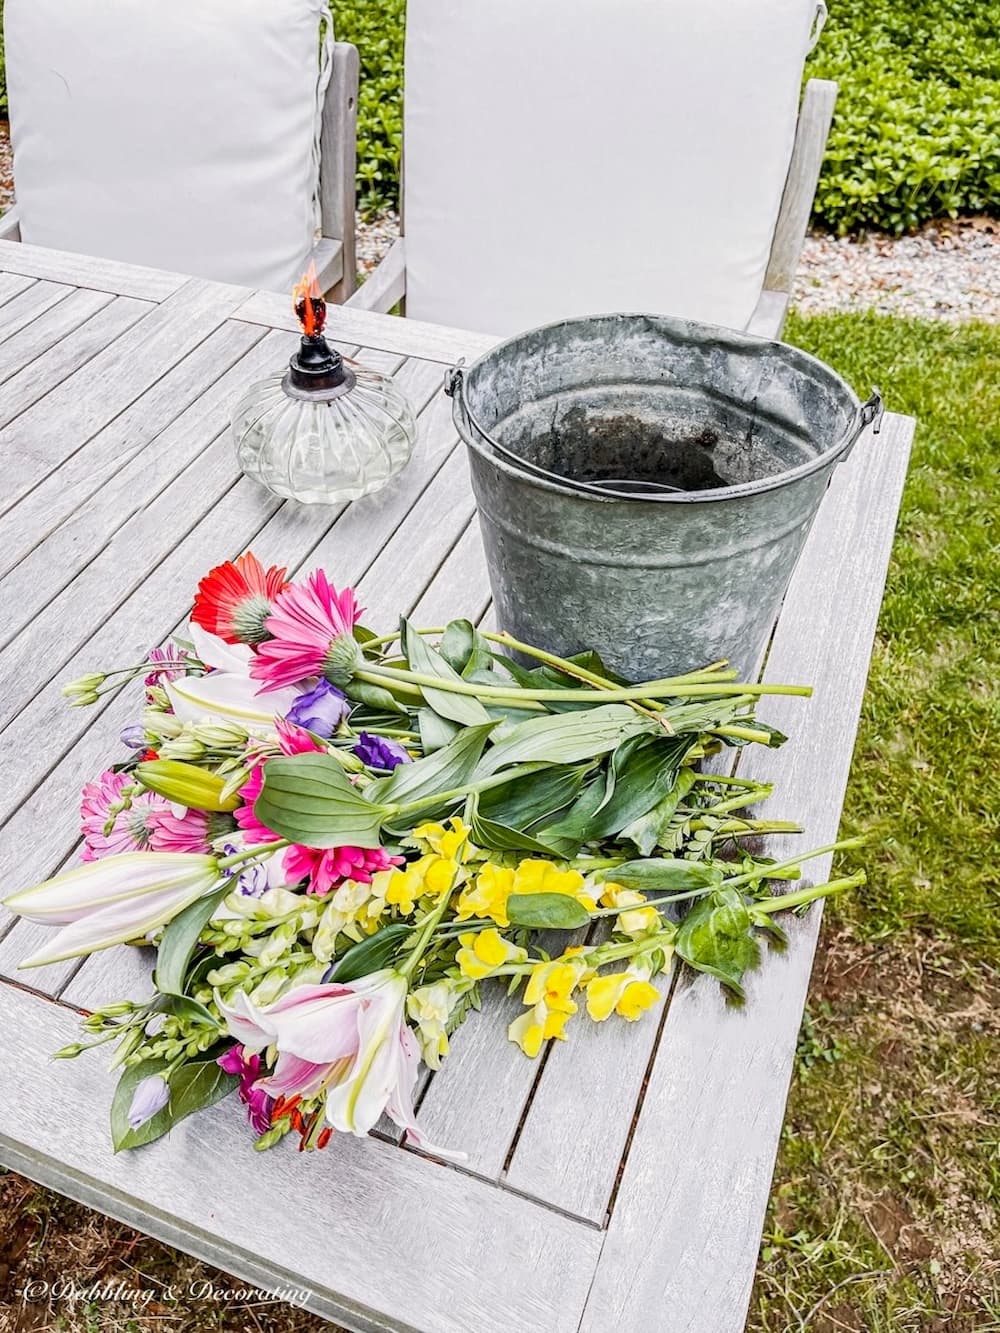 Bucket on Table with Flowers